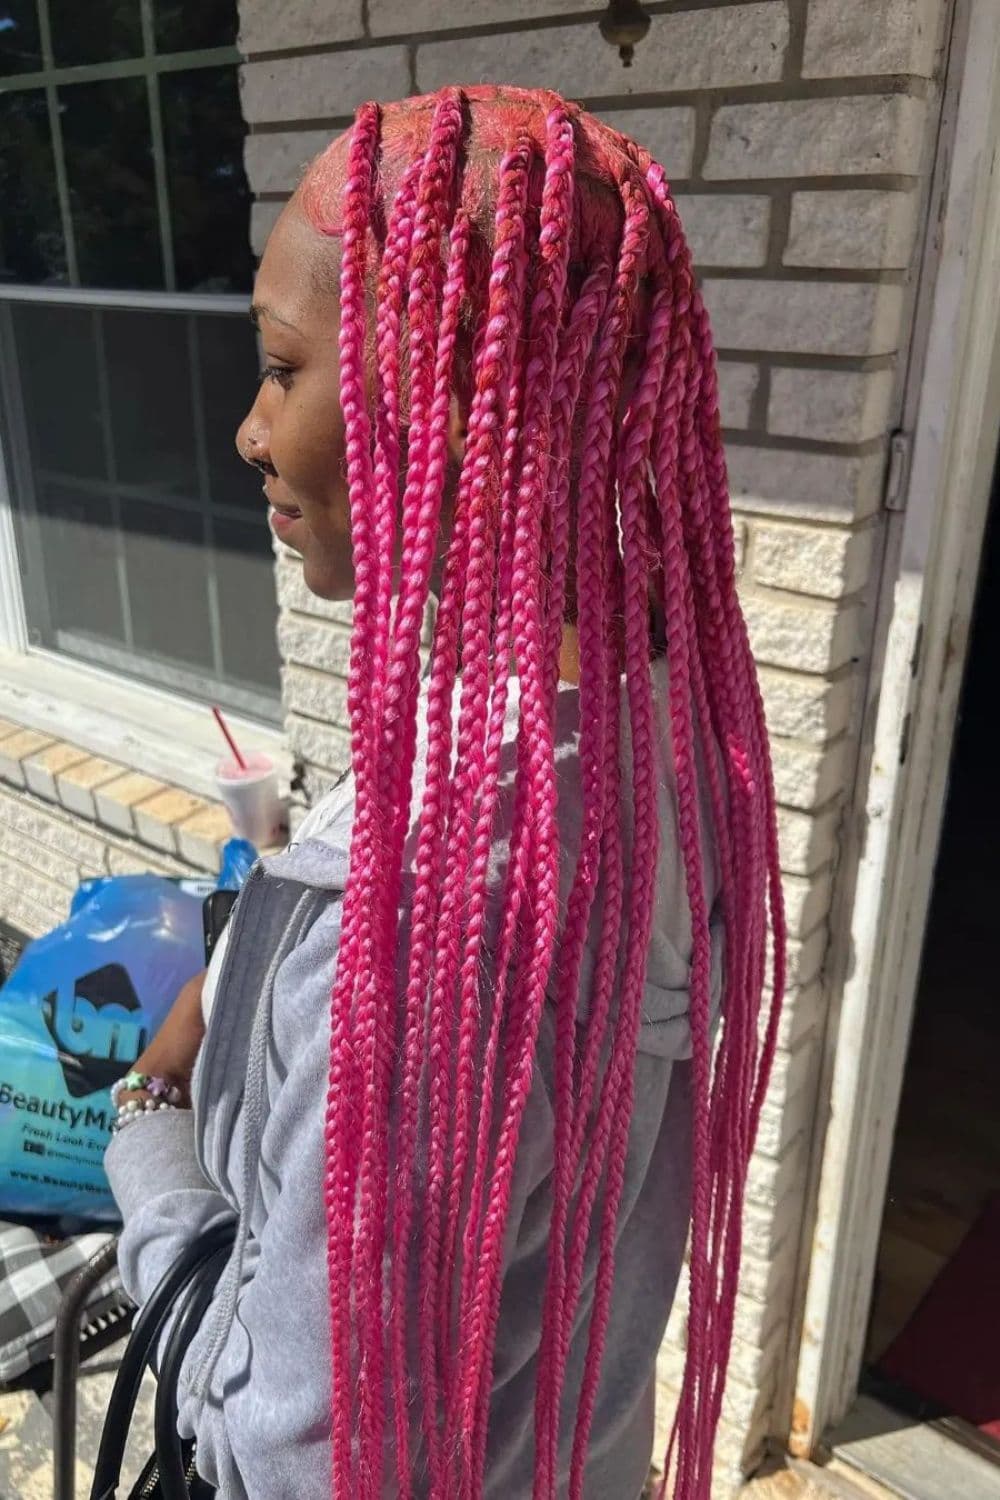 Side view of a woman with pink lemonade braids.